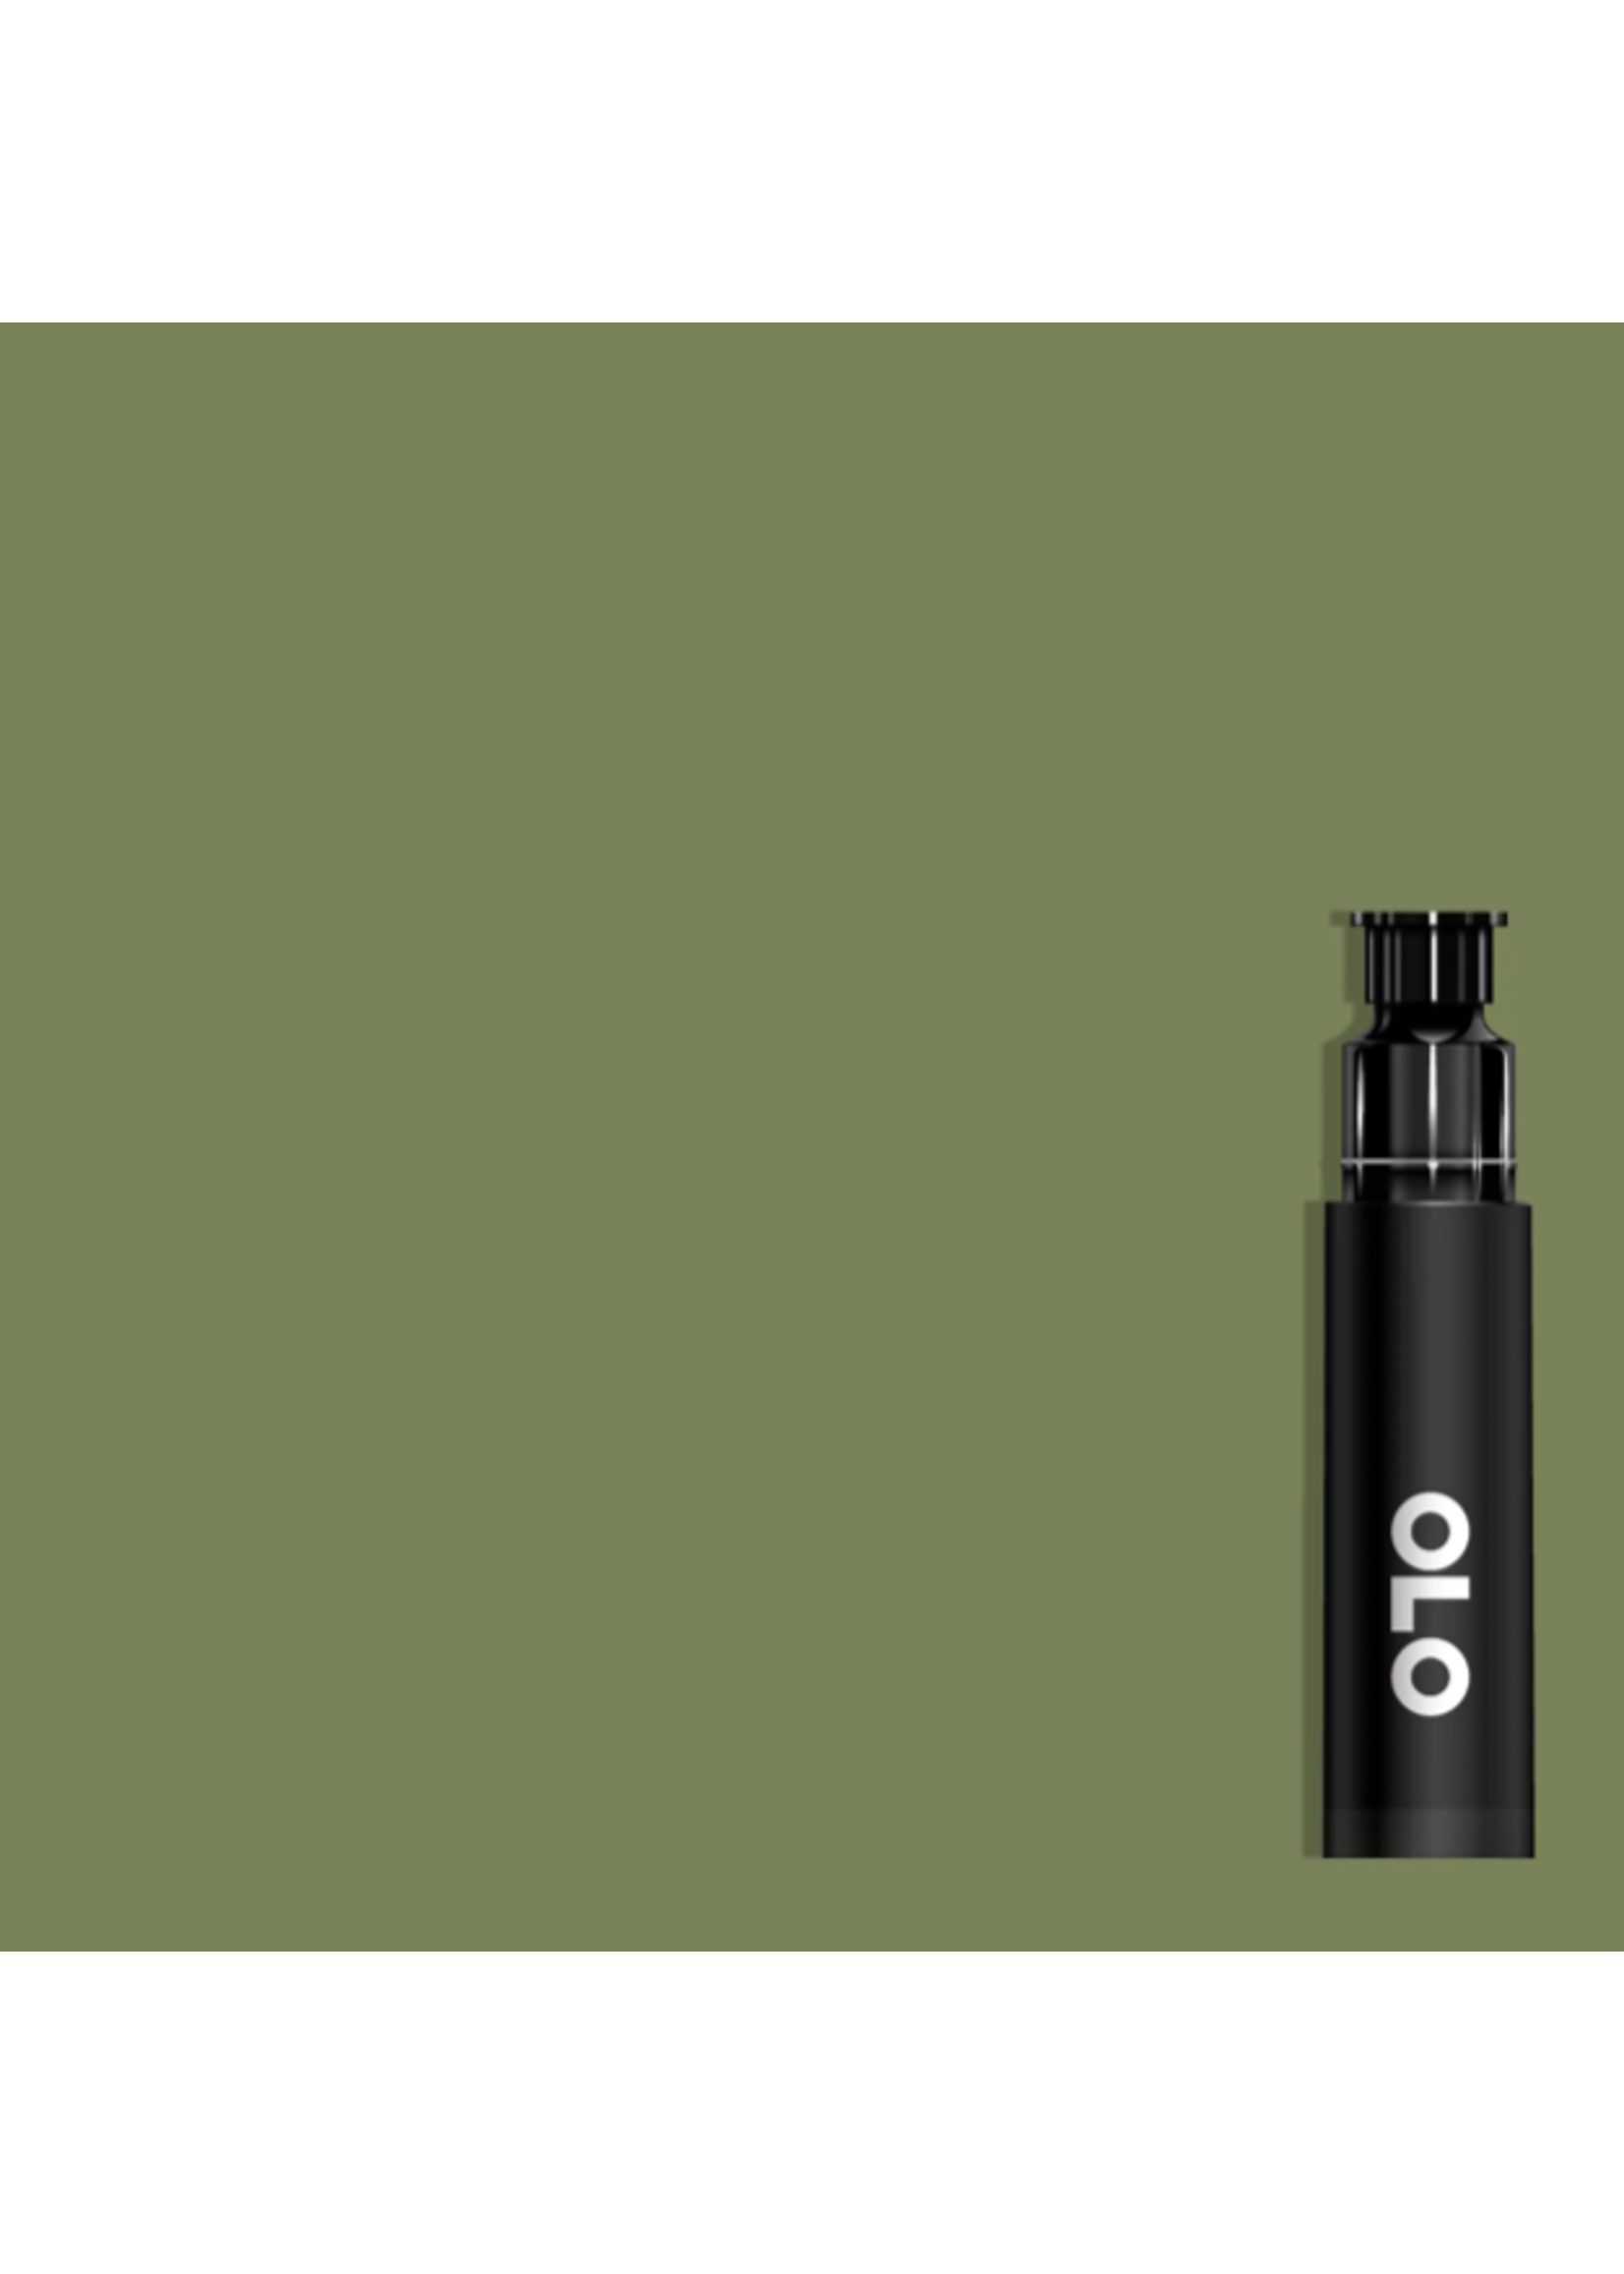 OLO OLO Brush Replacement Cartridge: Moss